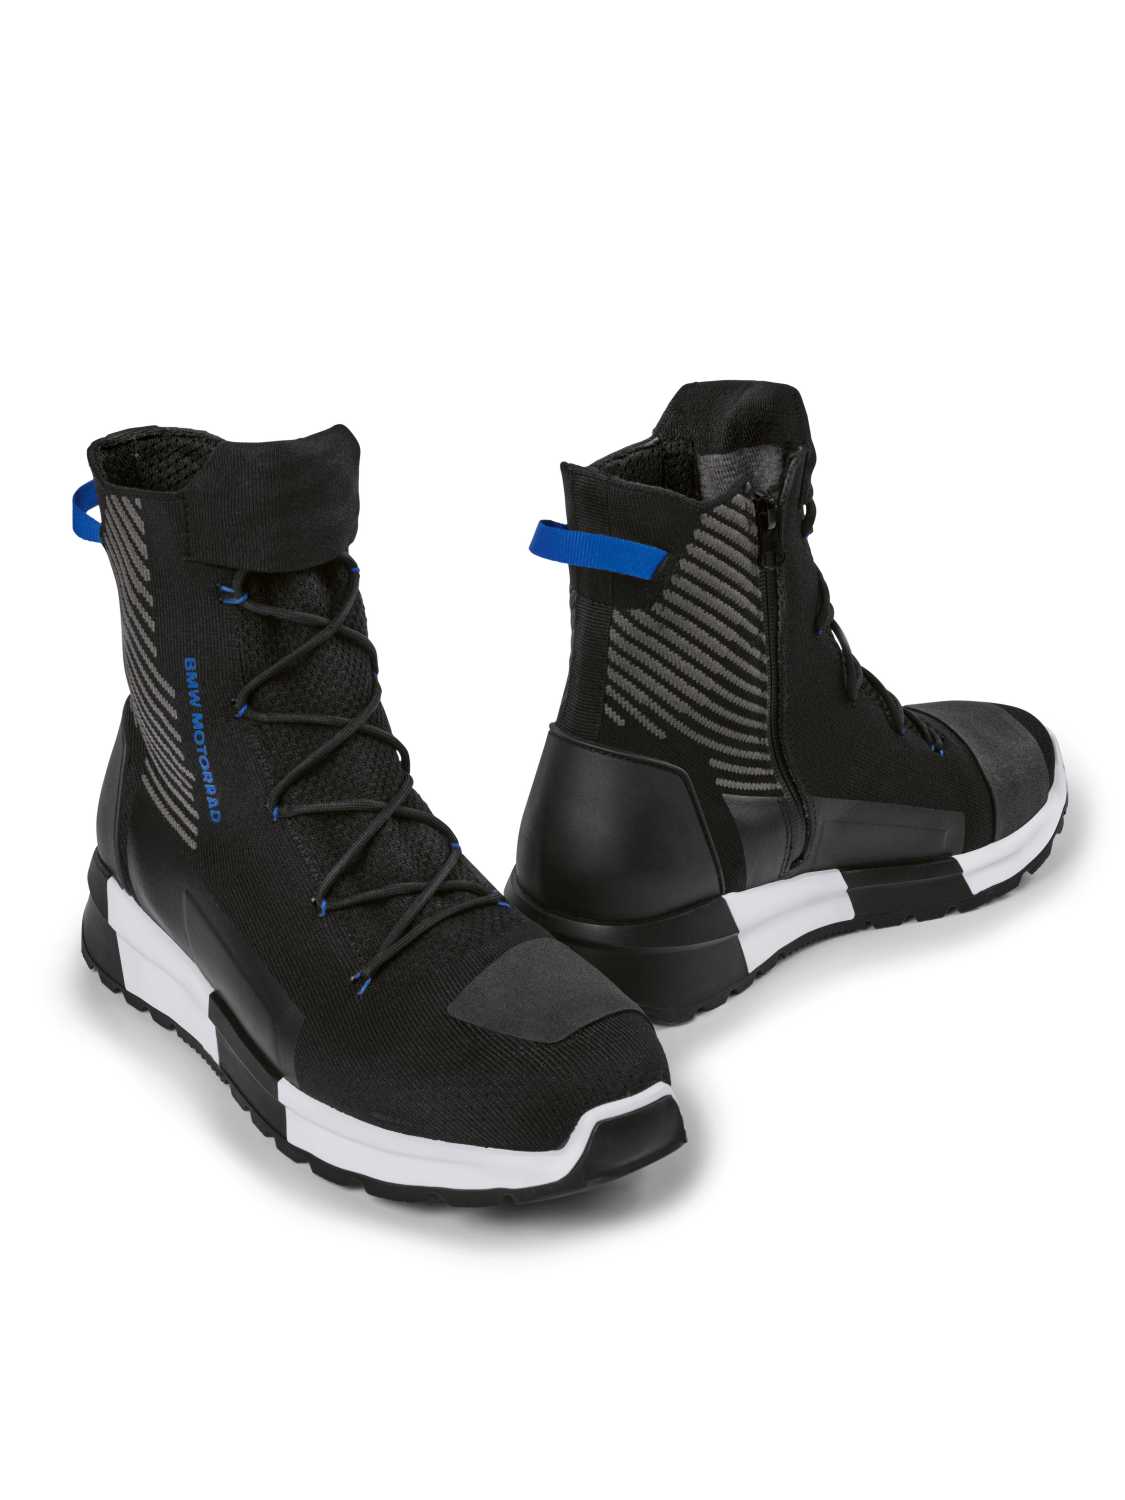 **BUY DIRECT FOR £195** BMW Motorrad Sneaker KnitLite Boots Trainers ALL SIZES